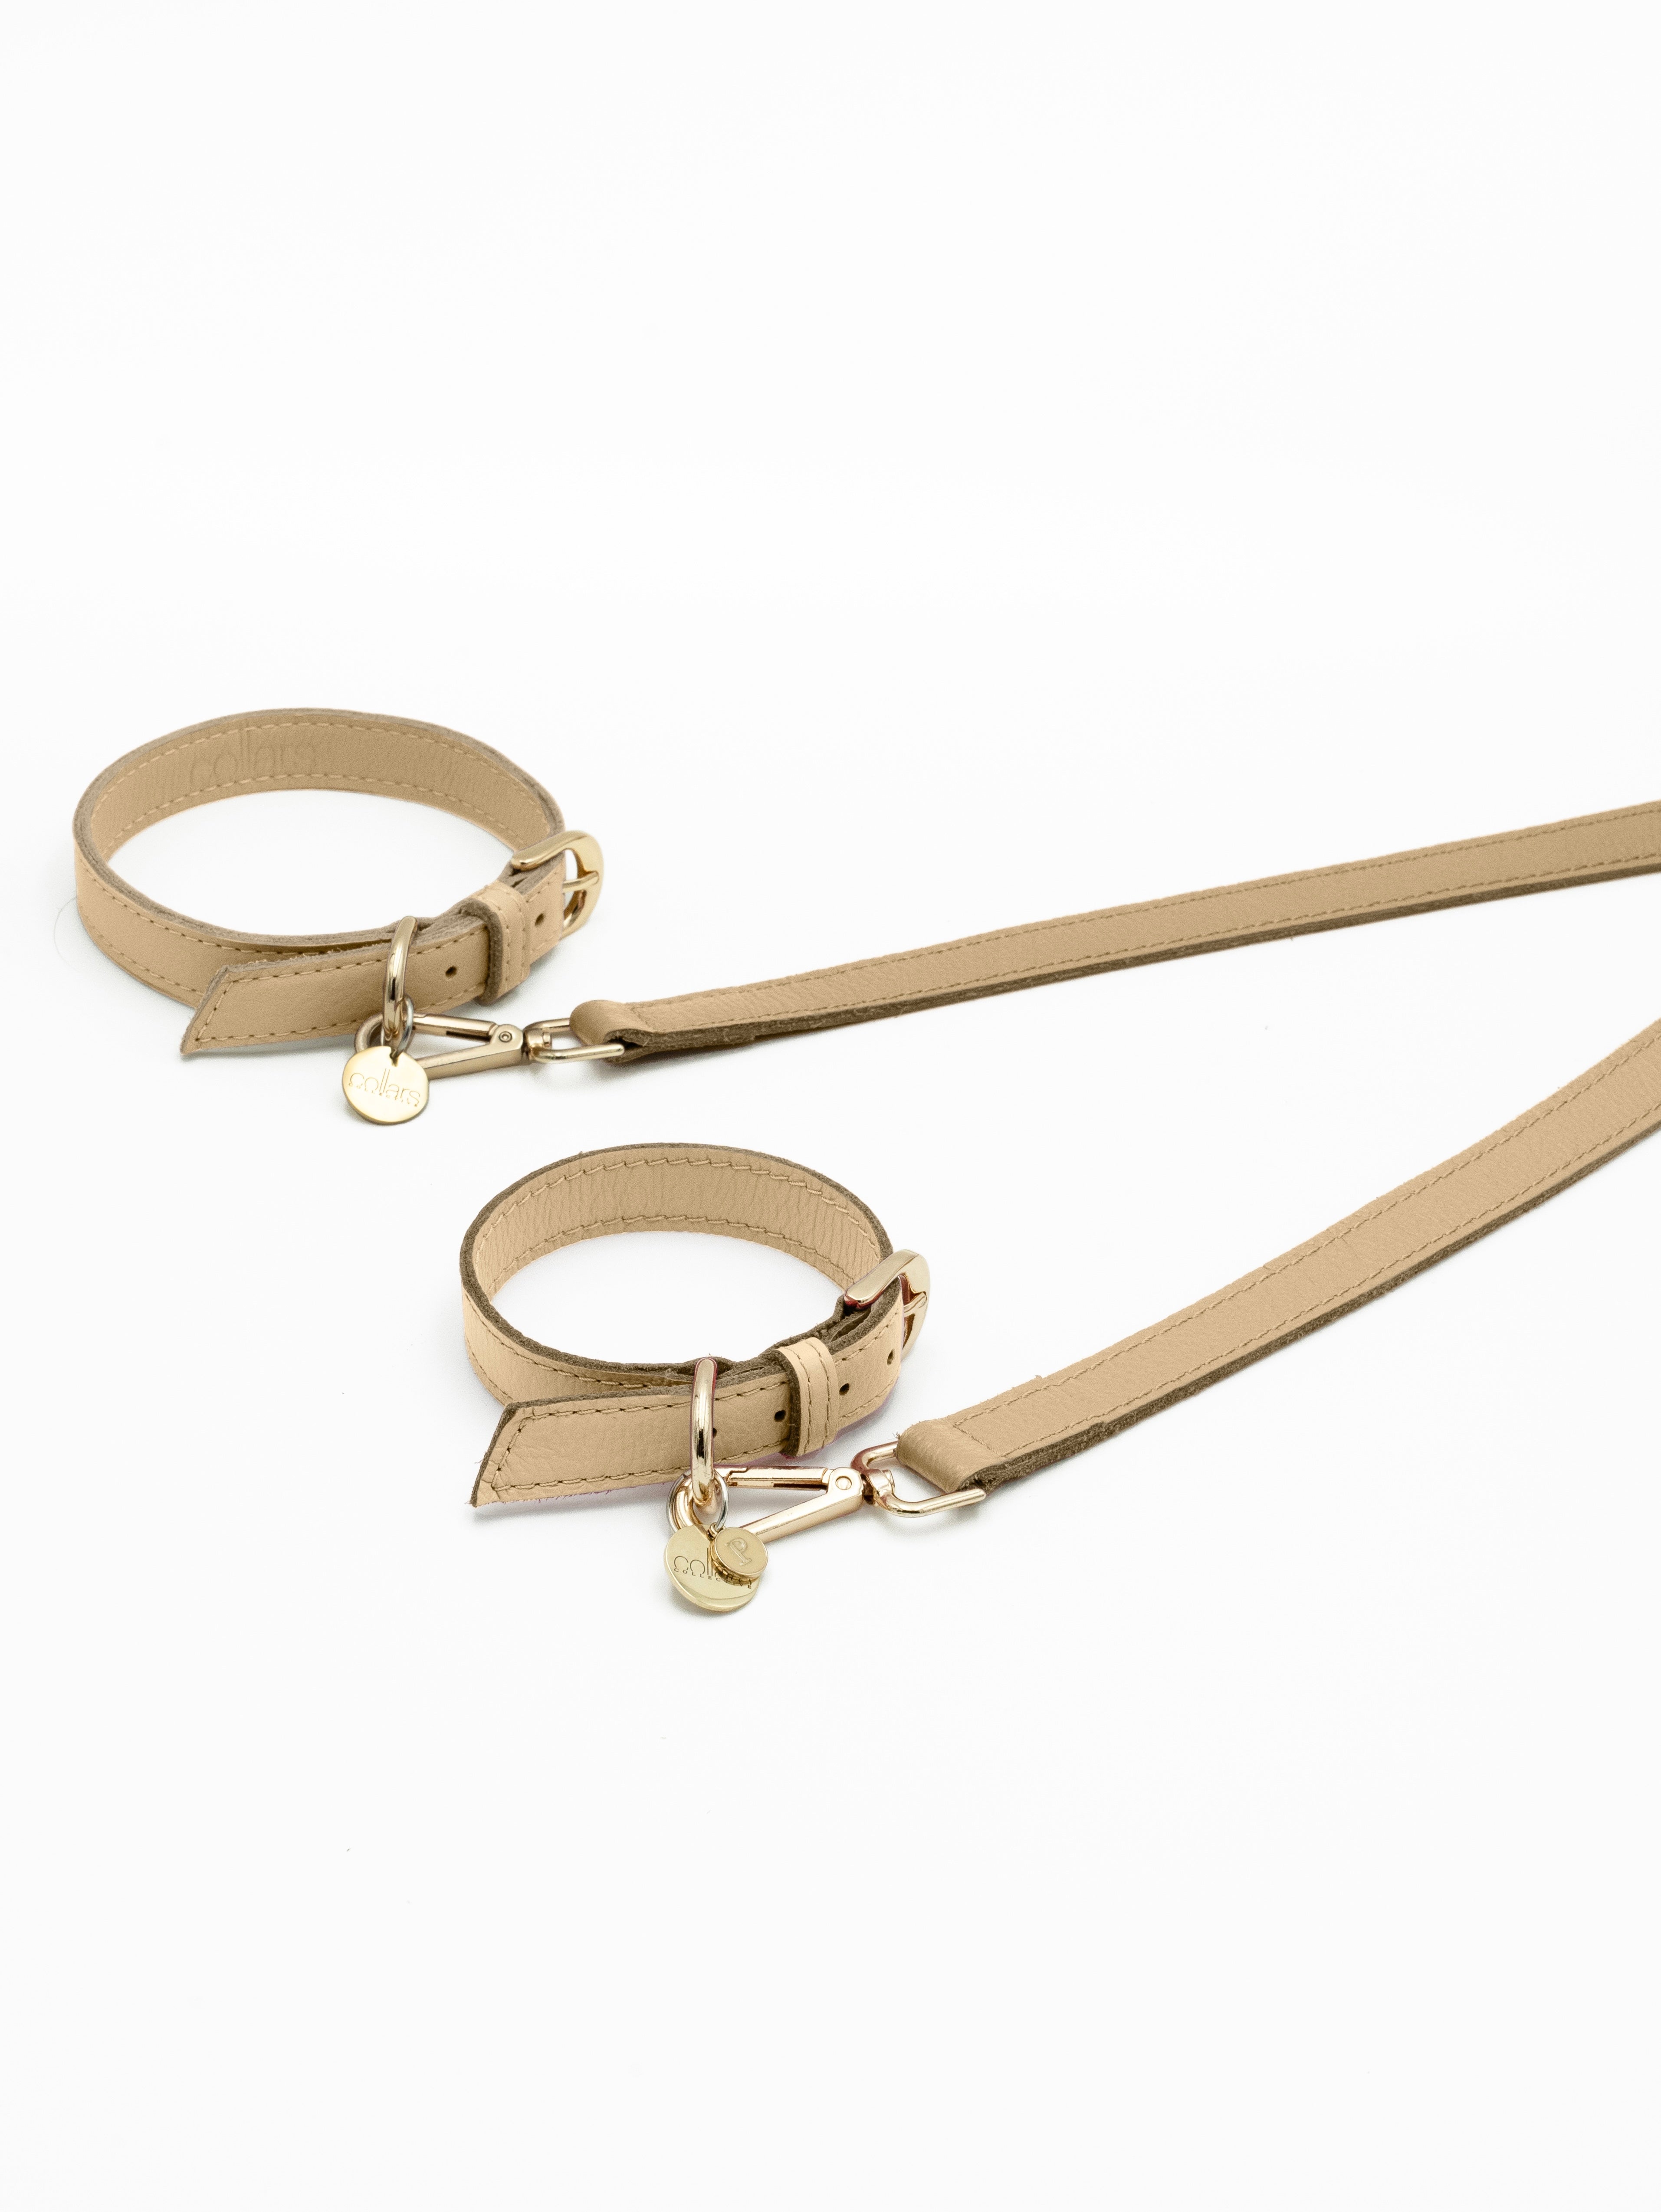 LEASH – Collars Collective